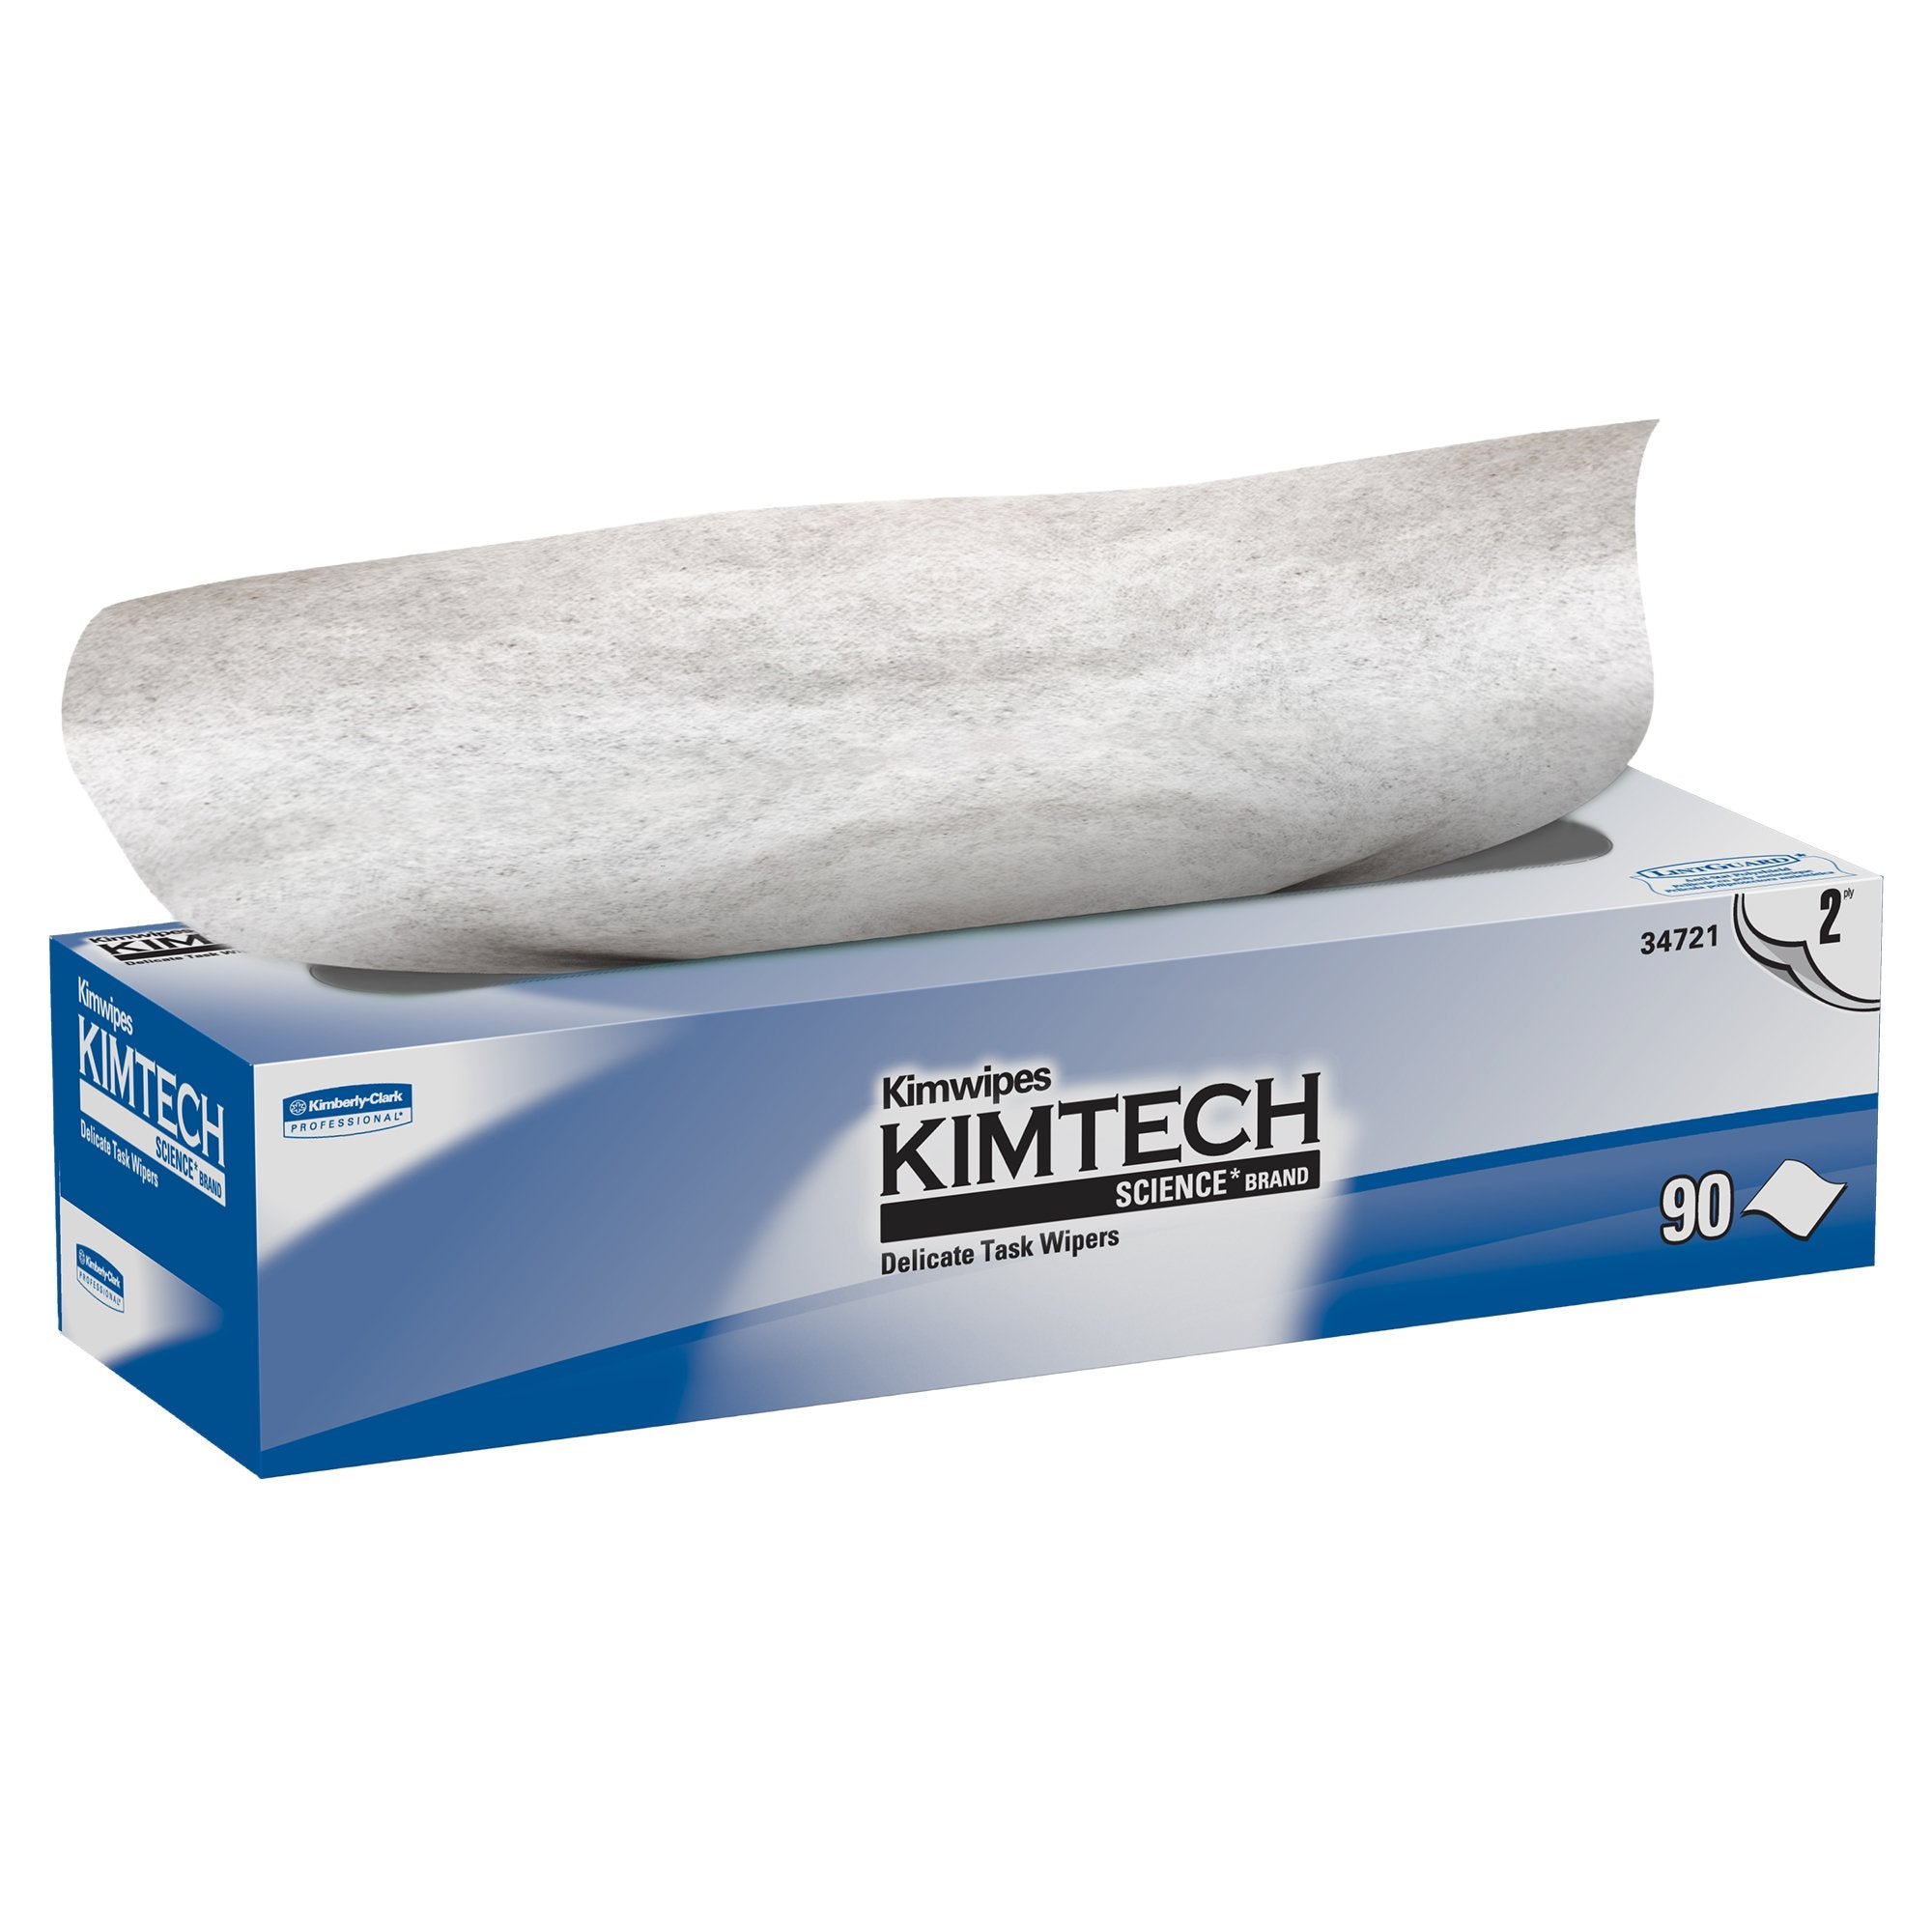 Delicate Task Wipe Kimtech Science Kimwipes Light Duty White NonSterile 2 Ply Tissue 14-7/10 X 16-3/5 Inch Disposable